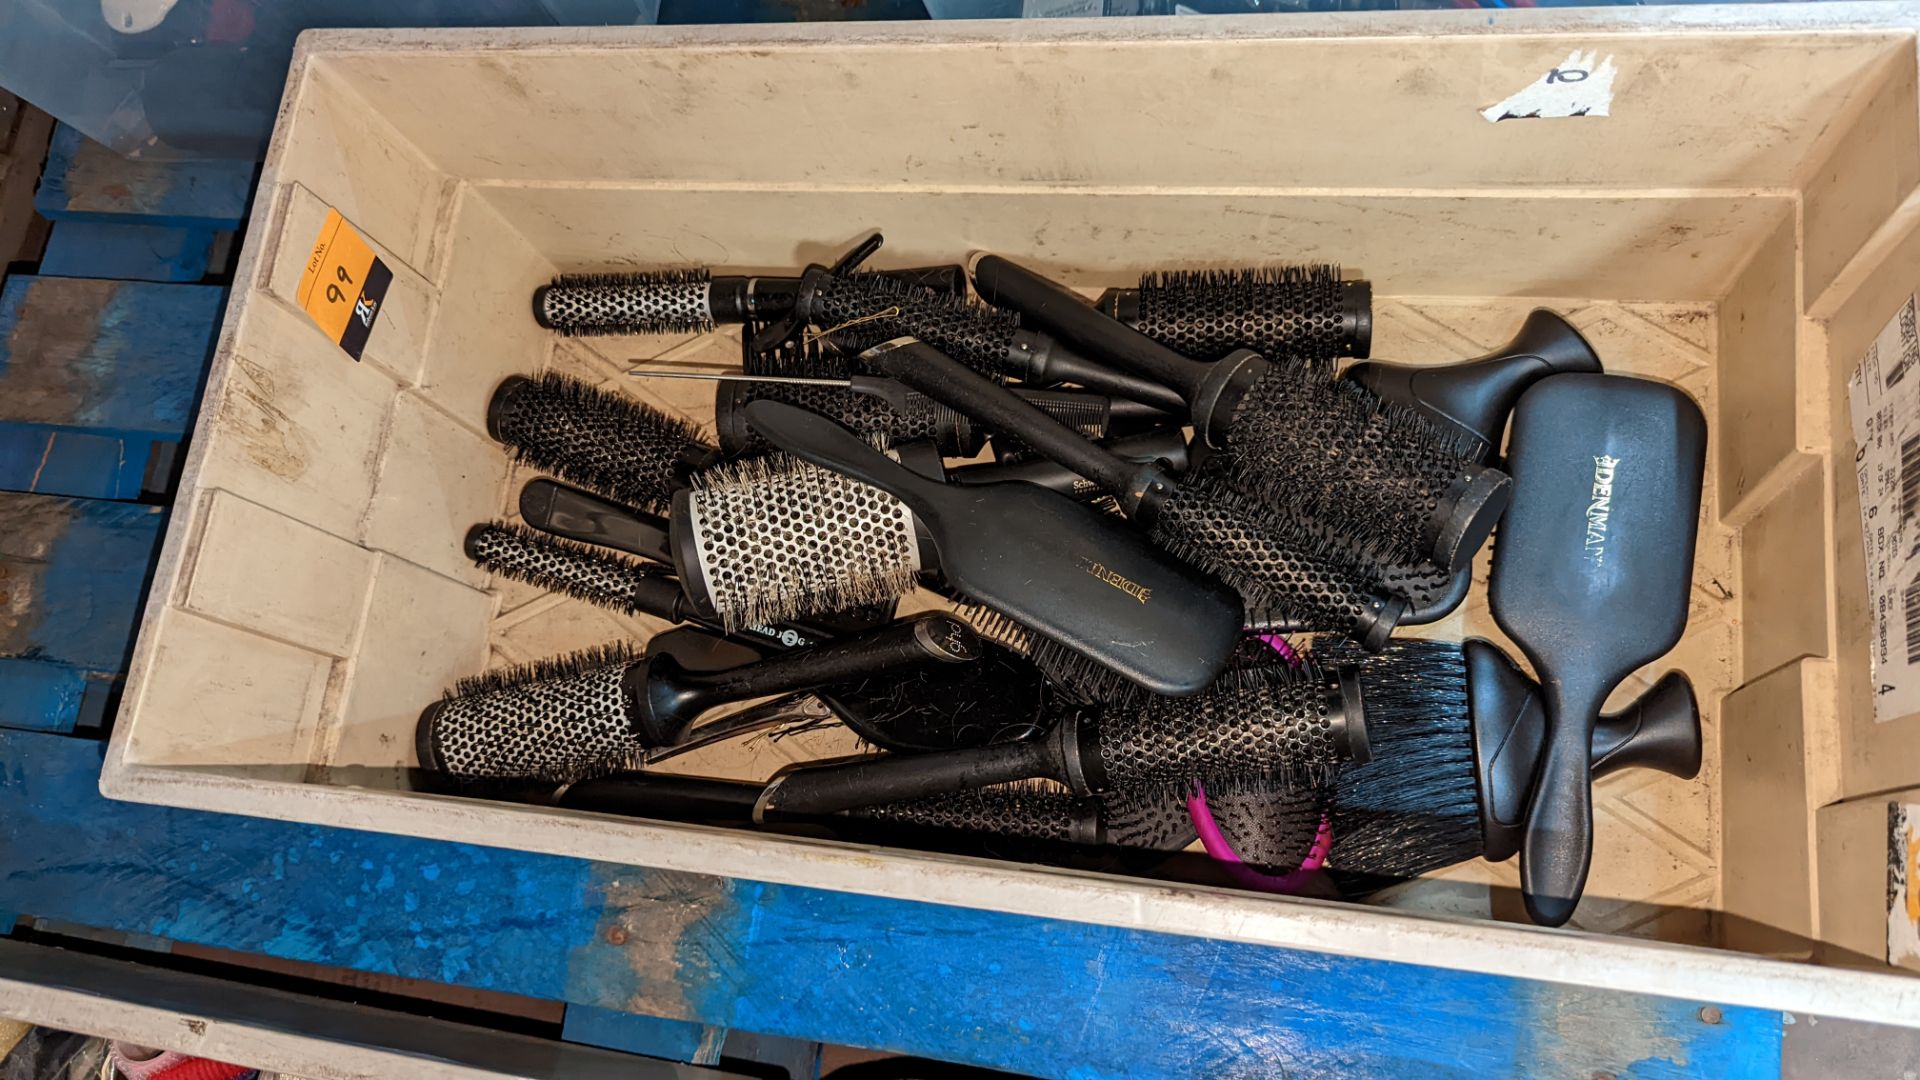 Contents of a crate of hairbrushes & similar - crate excluded - Image 3 of 4